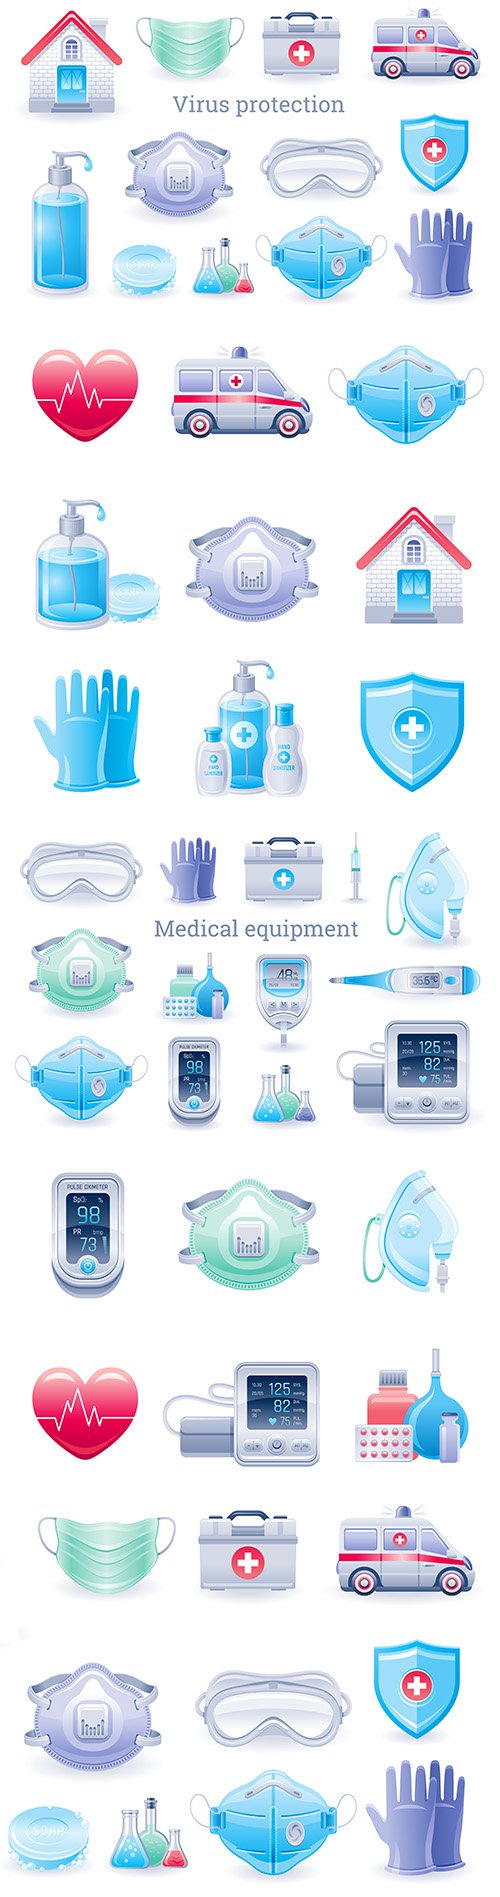 Virus protection and prevention kit medical equipment